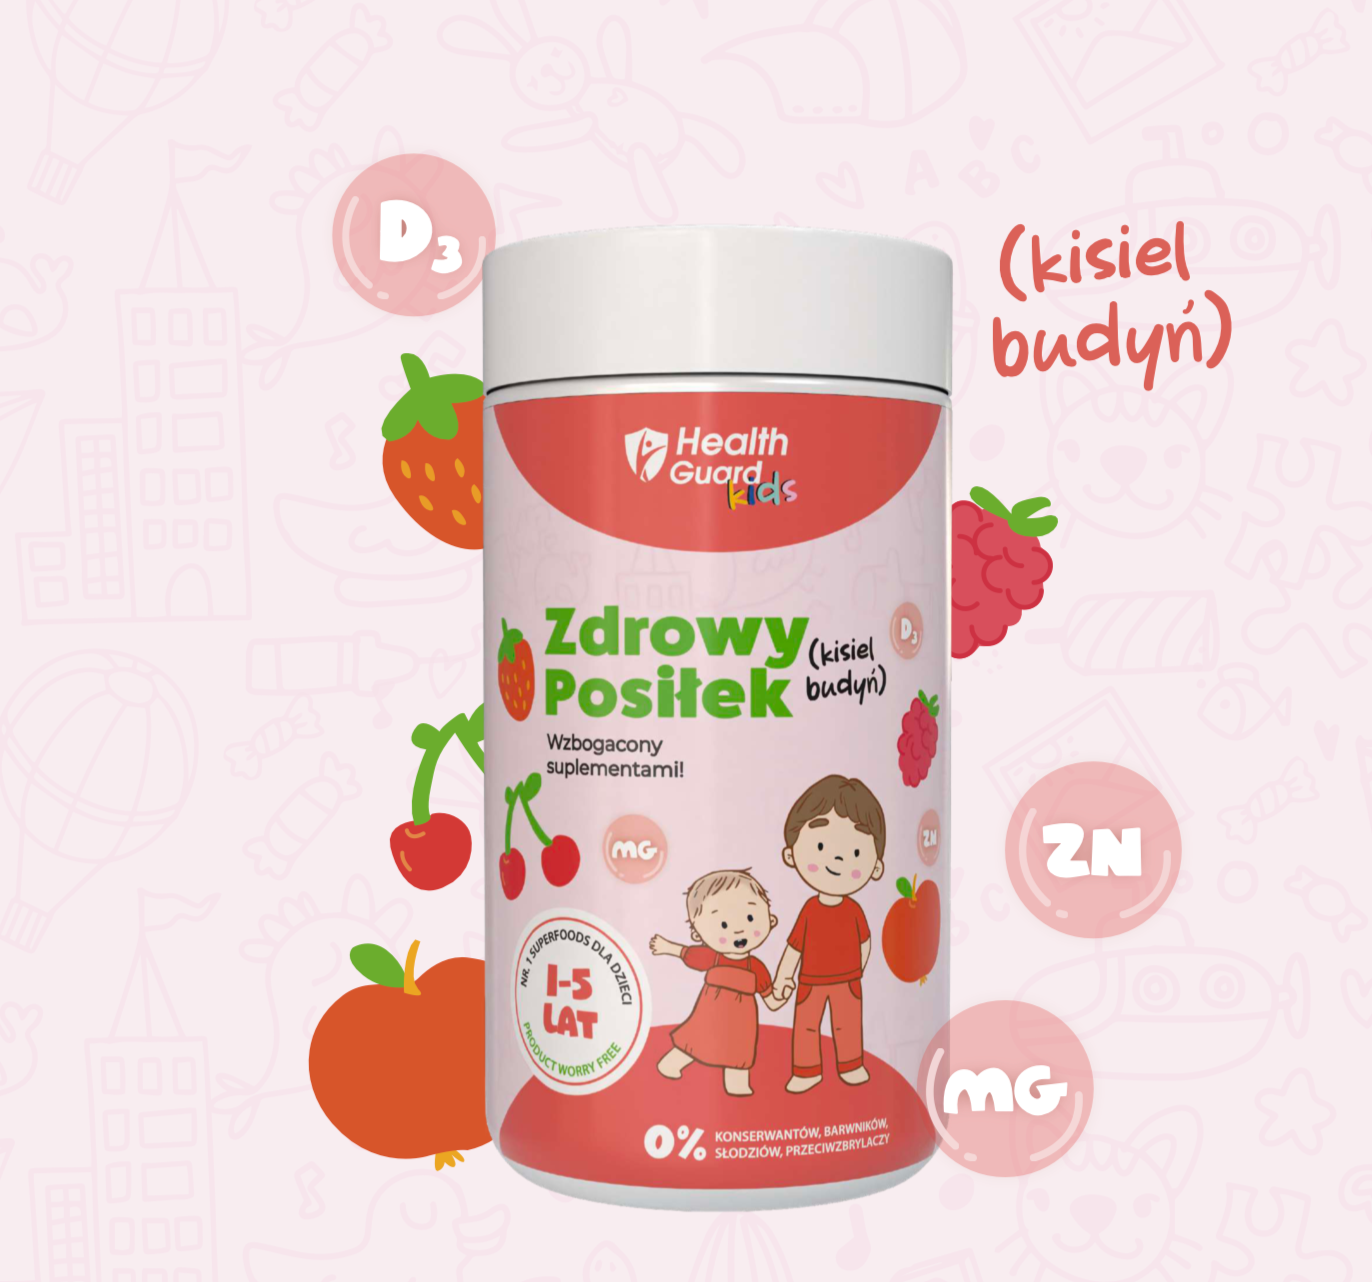 HealthGuard Kids: Healthy Meal - Enriched with Supplements! - STRAWBERRY, 500g, jelly/pudding, (ingredients: KUZU, SUPERFOODS, VITAMIN D3, MAGNESIUM, ZINC)